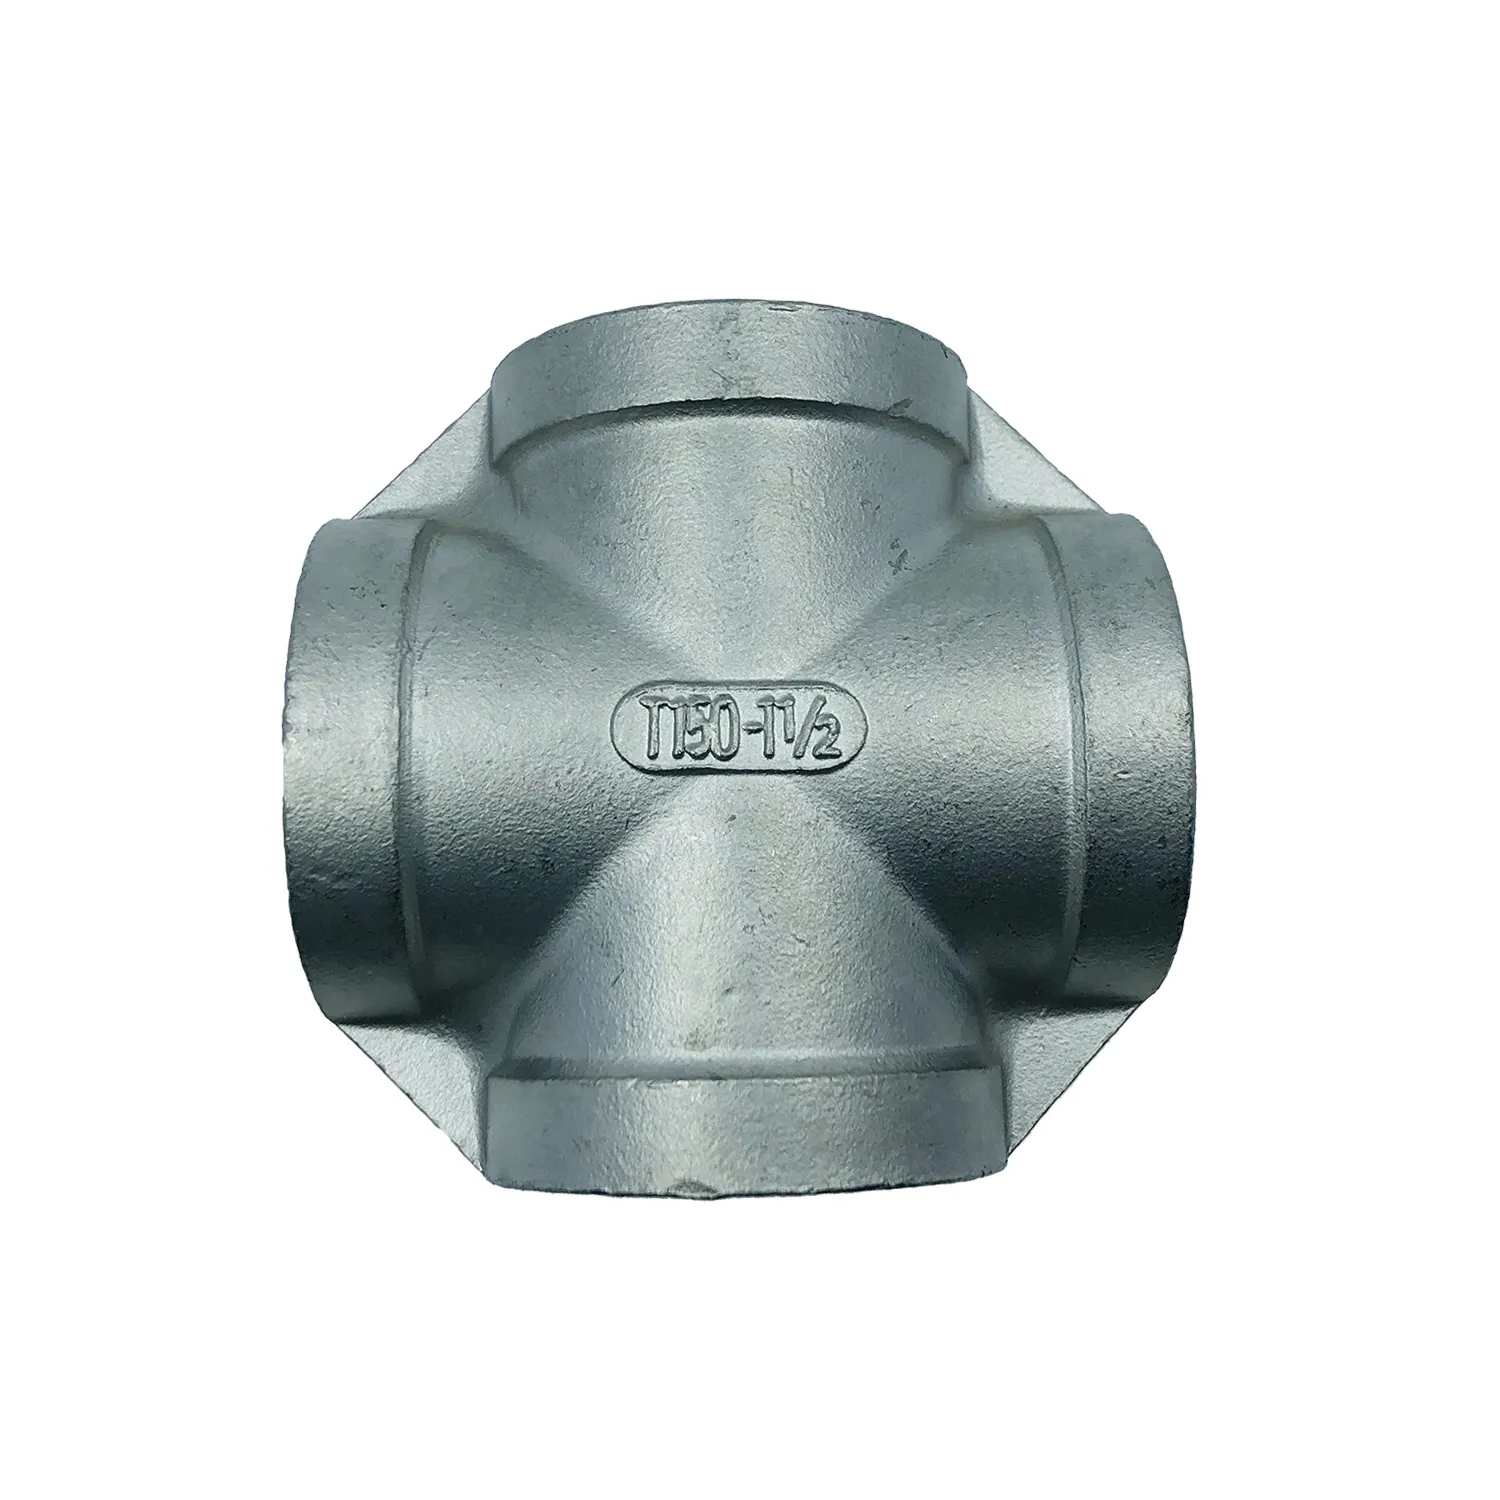 HYQY Lost Wax Casting Supplier 304 Stainless Steel Cross 4 Ways Valve Female Threaded Pipe Fitting Adaptor Connection